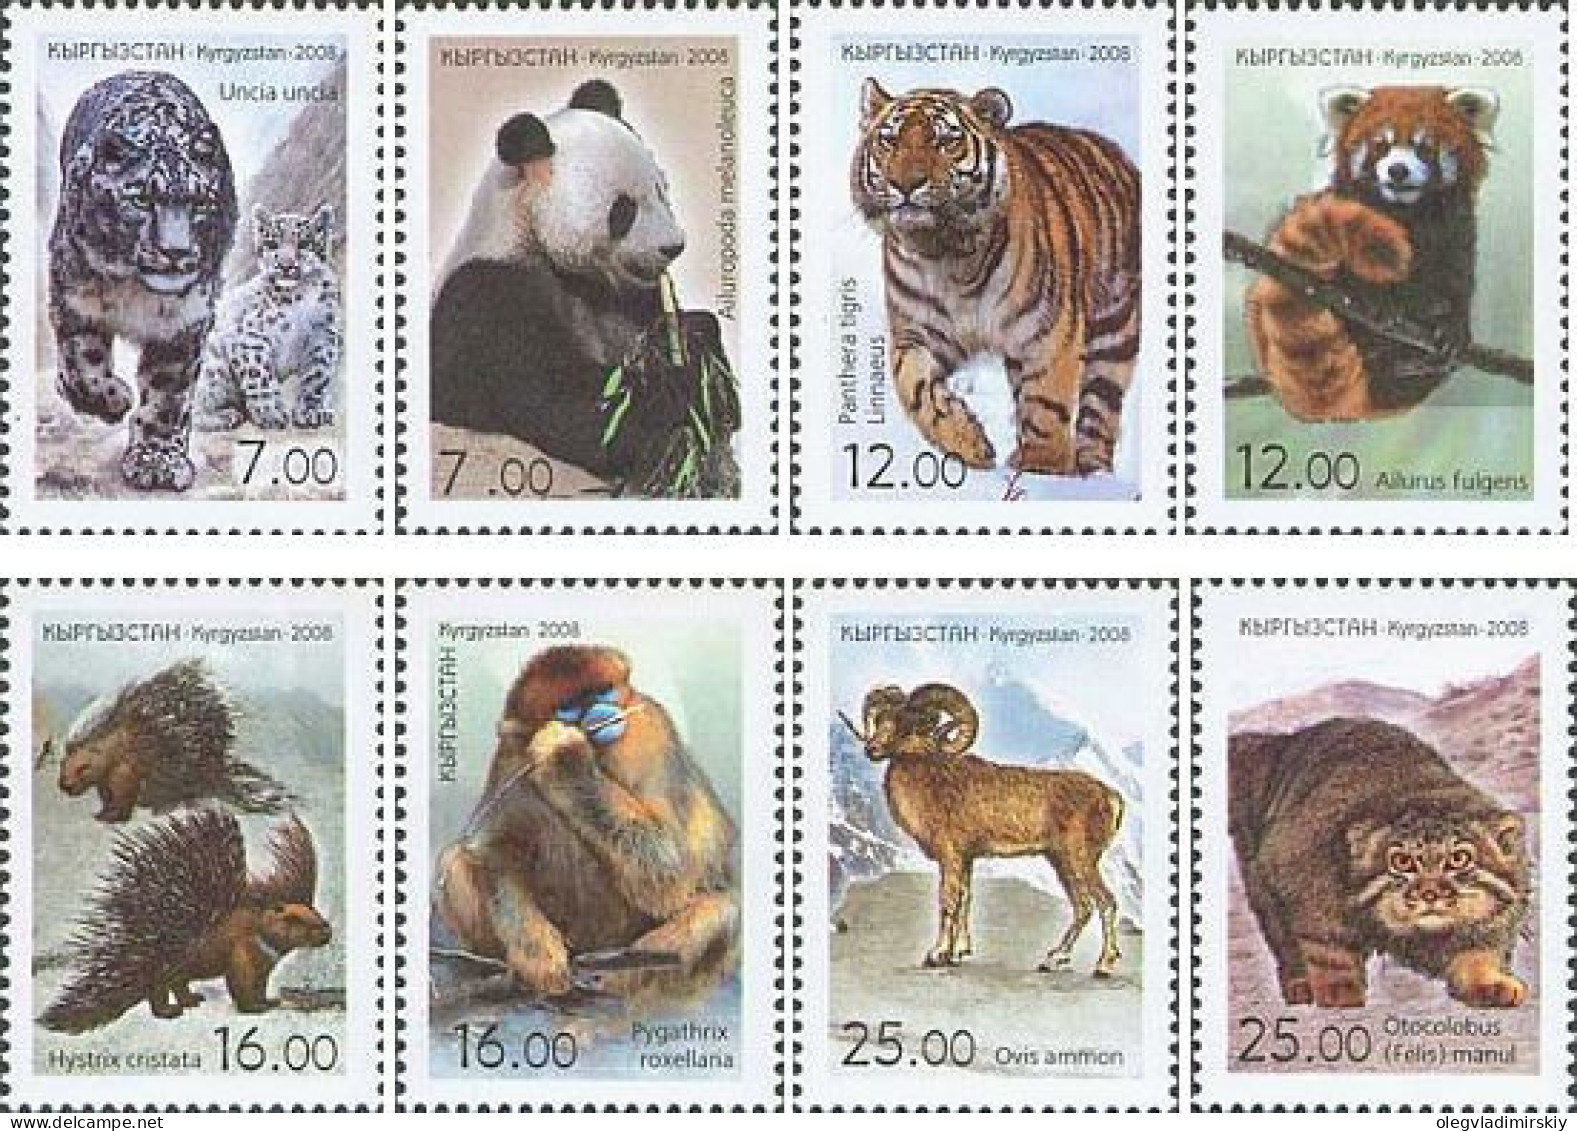 Kyrgyzstan 2008 Animals Of Asia From The Red Book Set Of 8 Perforated Stamps MNH - Big Cats (cats Of Prey)